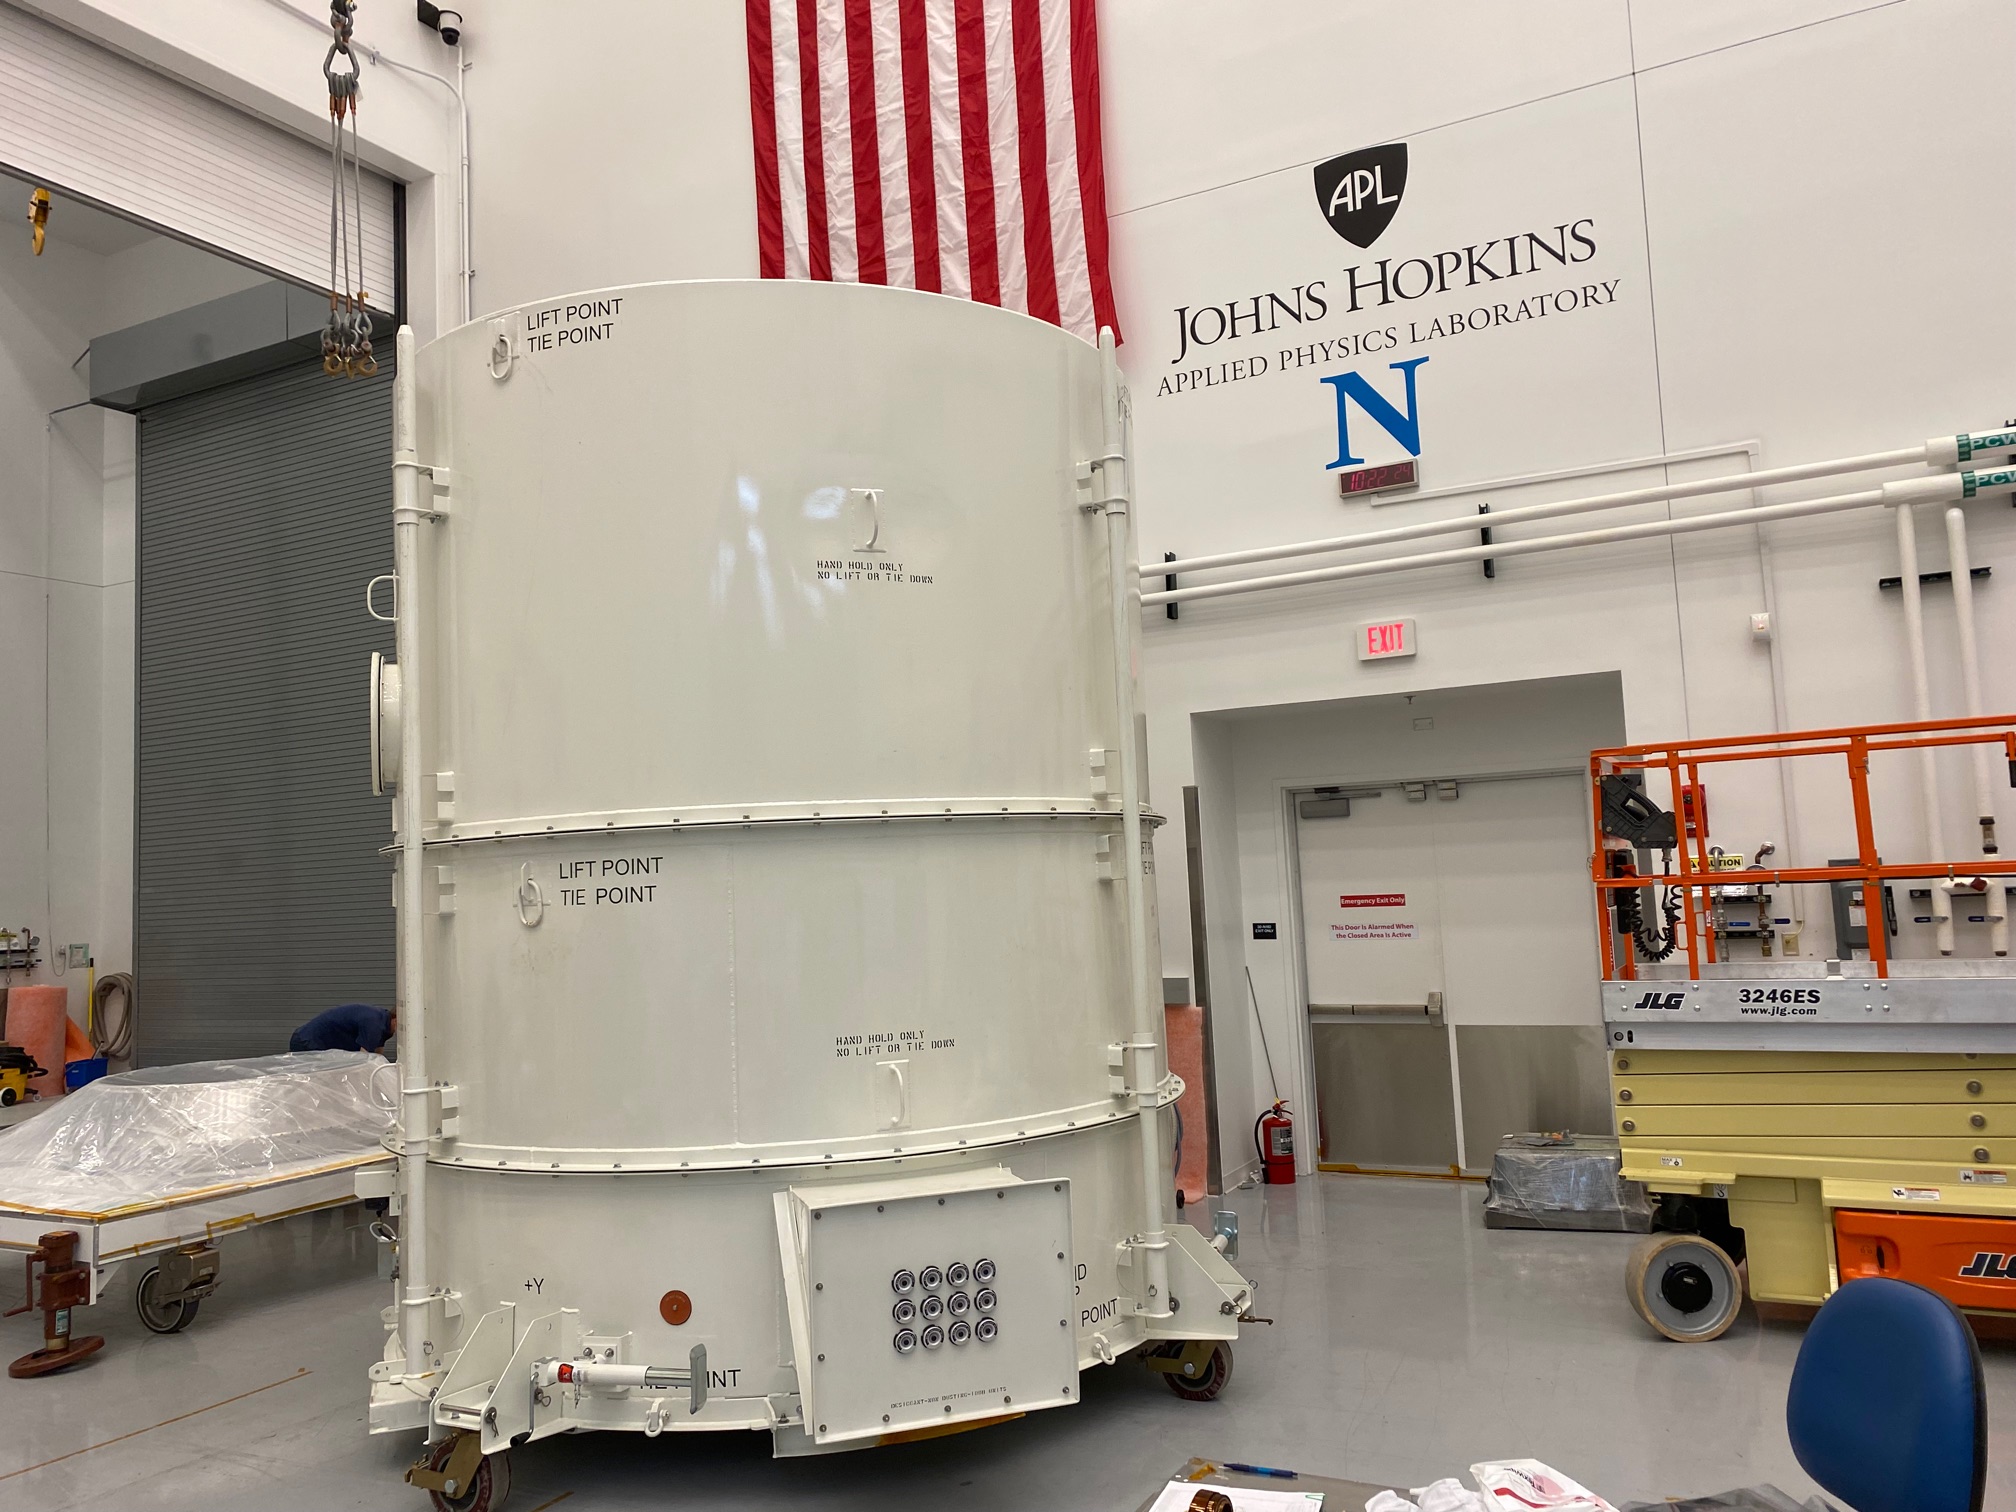 Europa Clipper's propulsion module arrives in its shipping container in the cleanroom